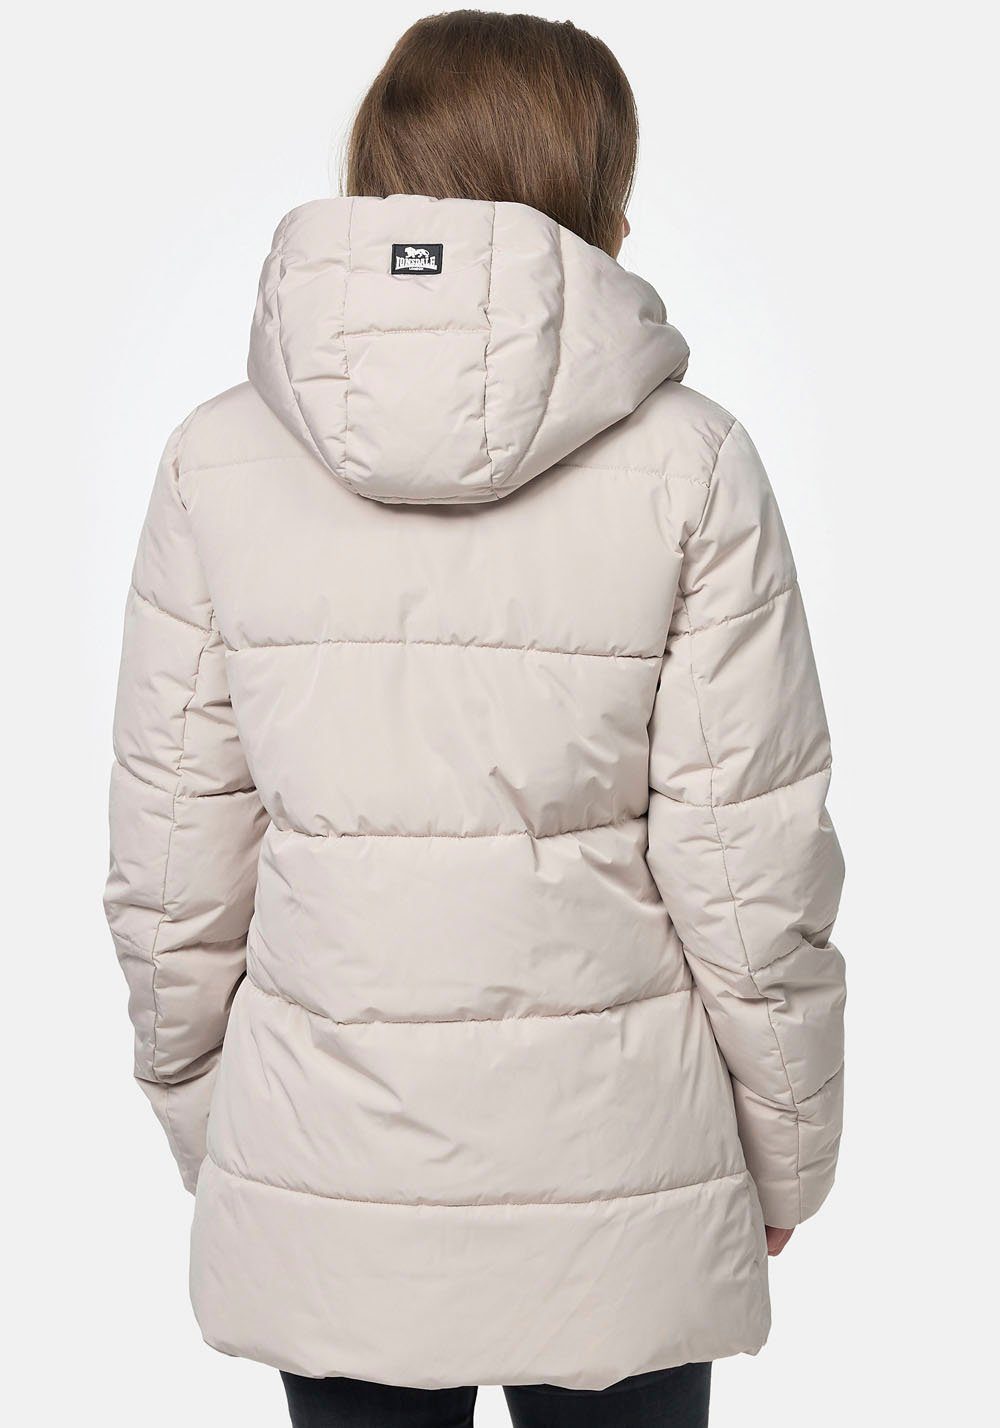 Sand Lonsdale SALLY Outdoorjacke